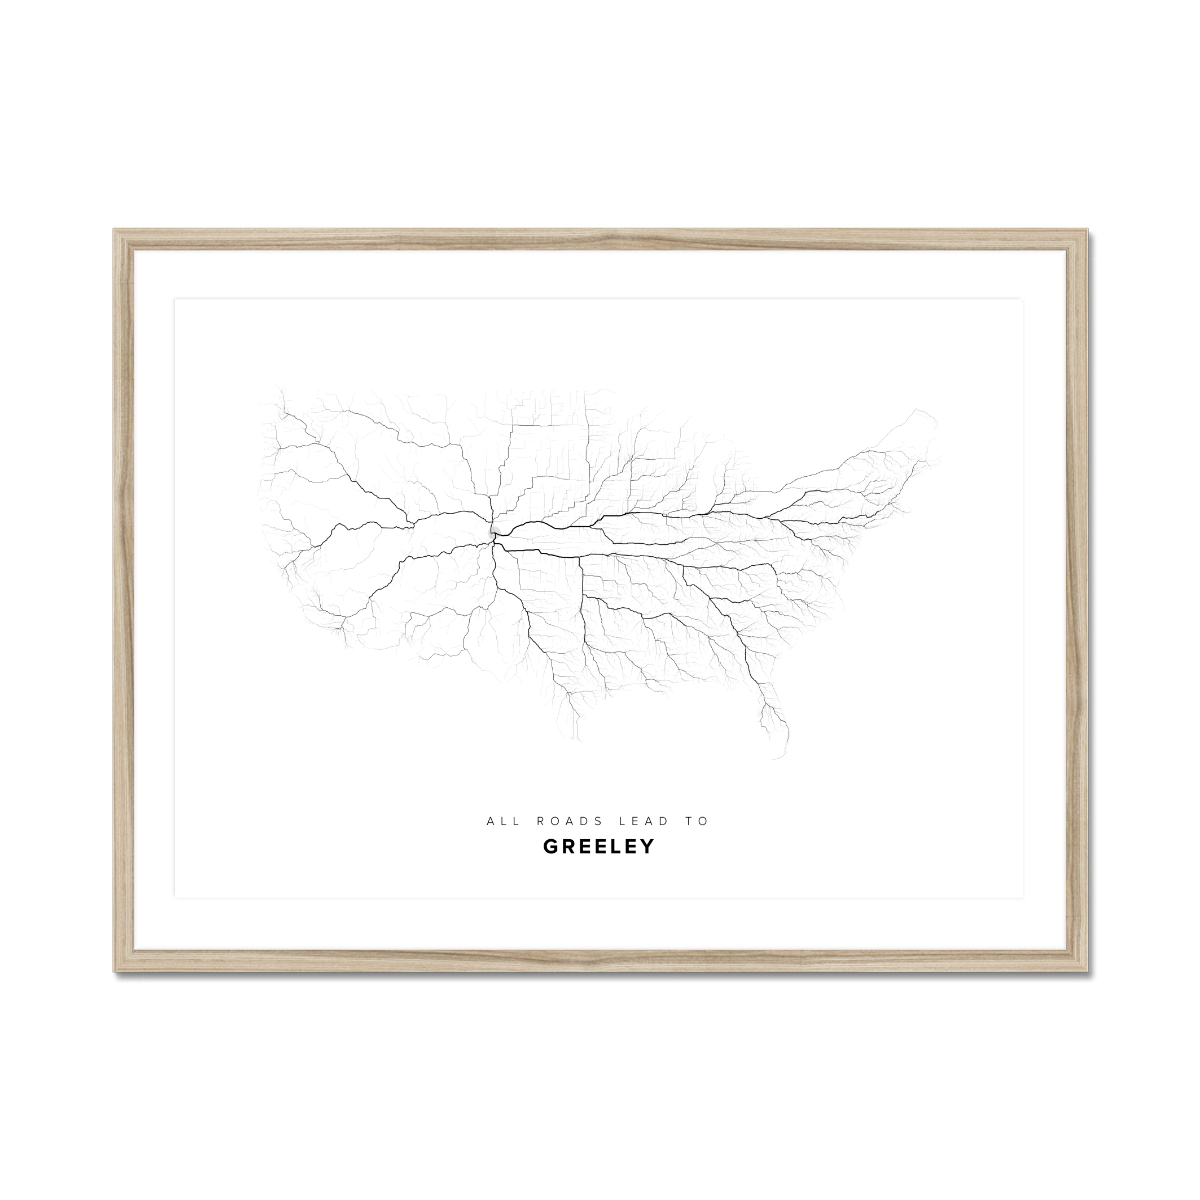 All roads lead to Greeley (United States of America) Fine Art Map Print